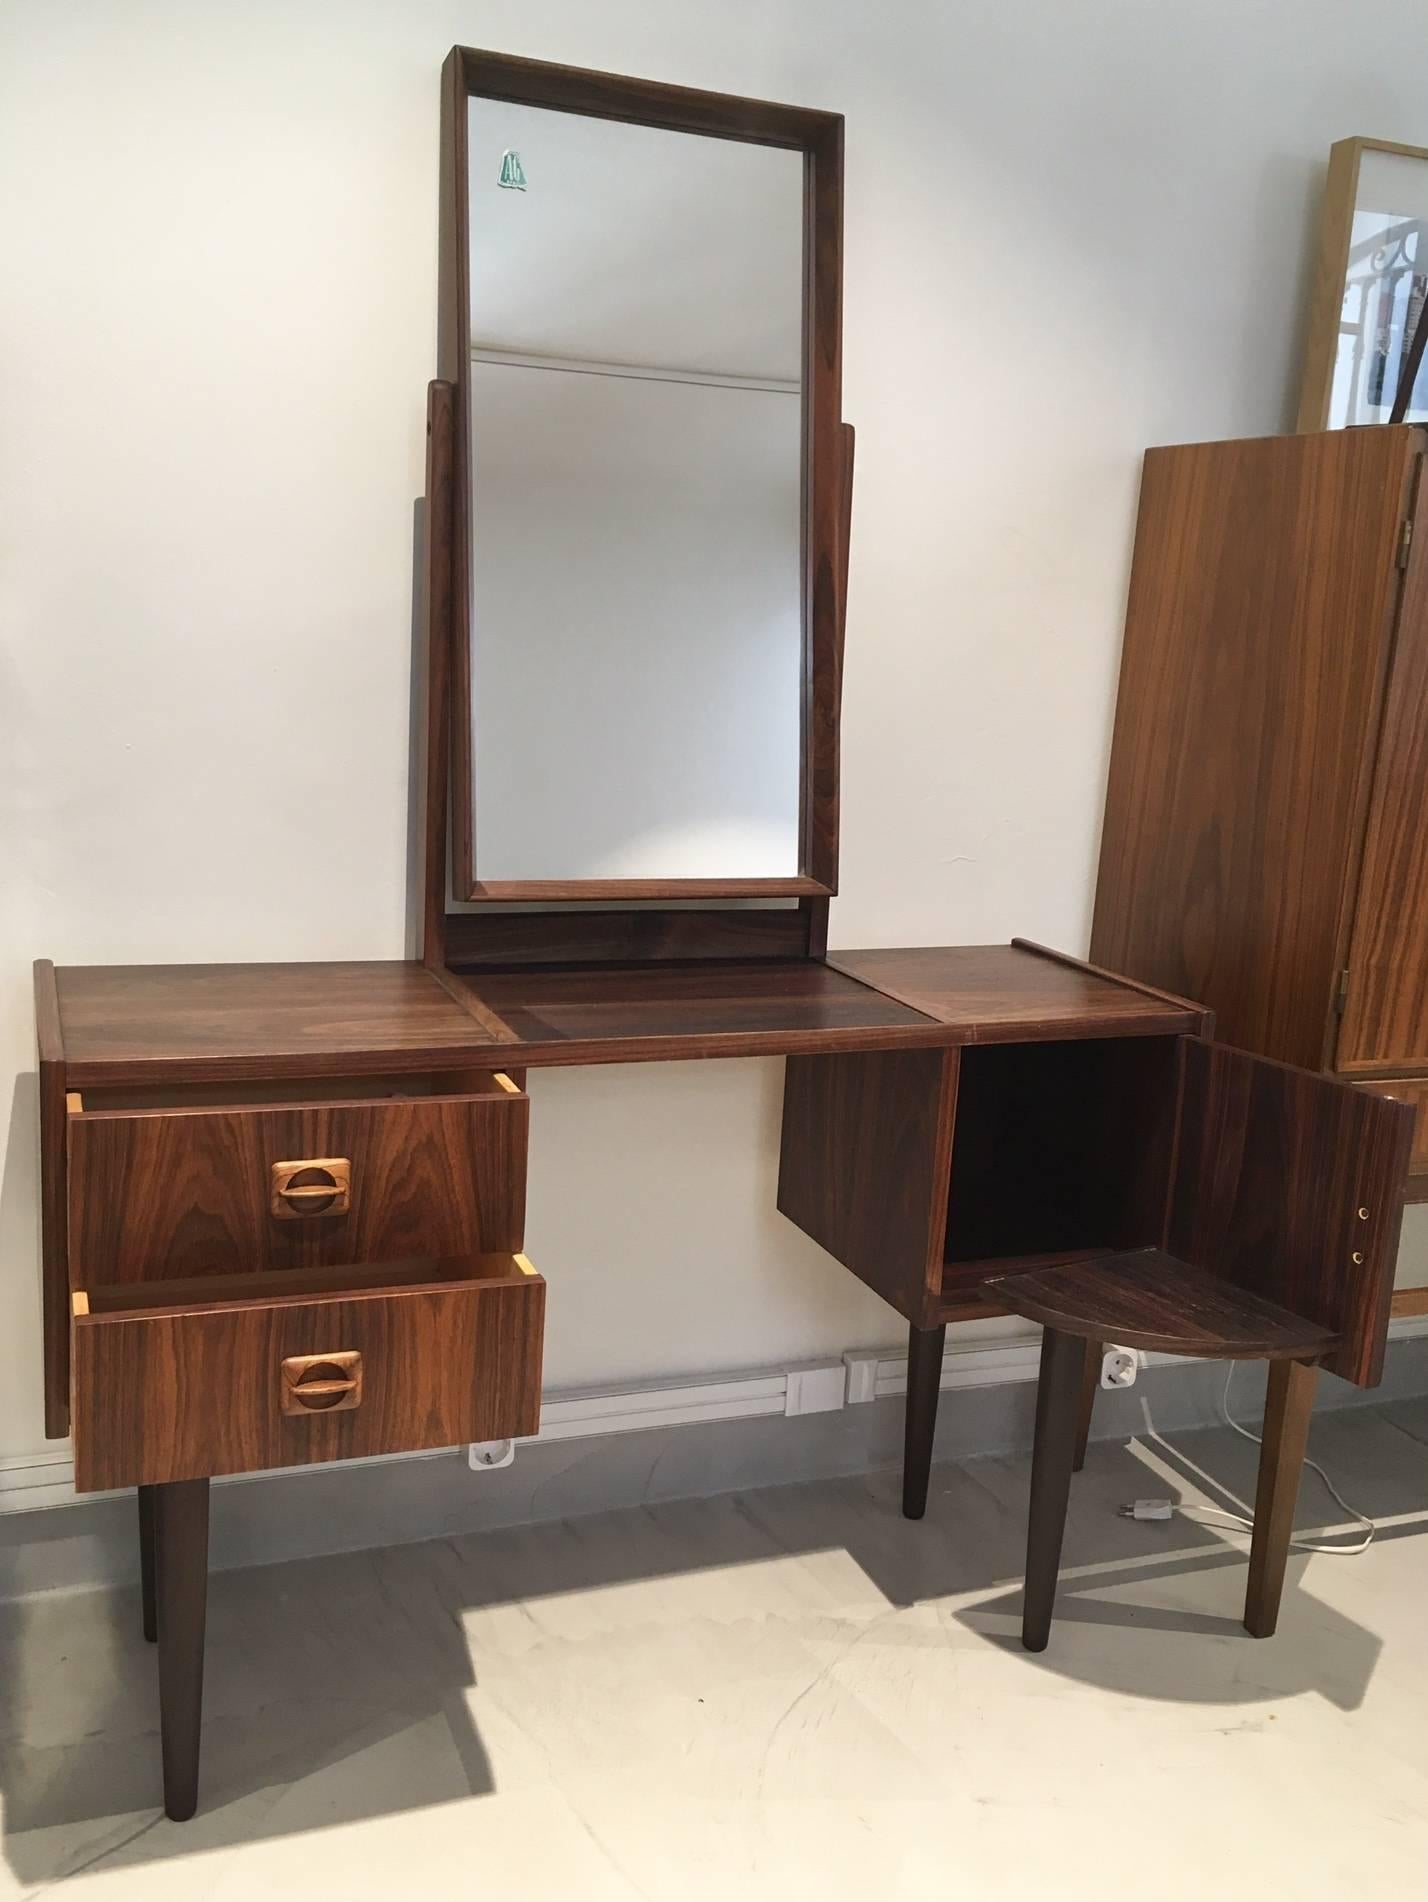 Stunning 1950s Danish dressing table with adjustable tilting mirror, two drawers for toiletries and another storage compartment. Veneered with rosewood. Maker marked as AG Spejl Kobberbeskyttet.